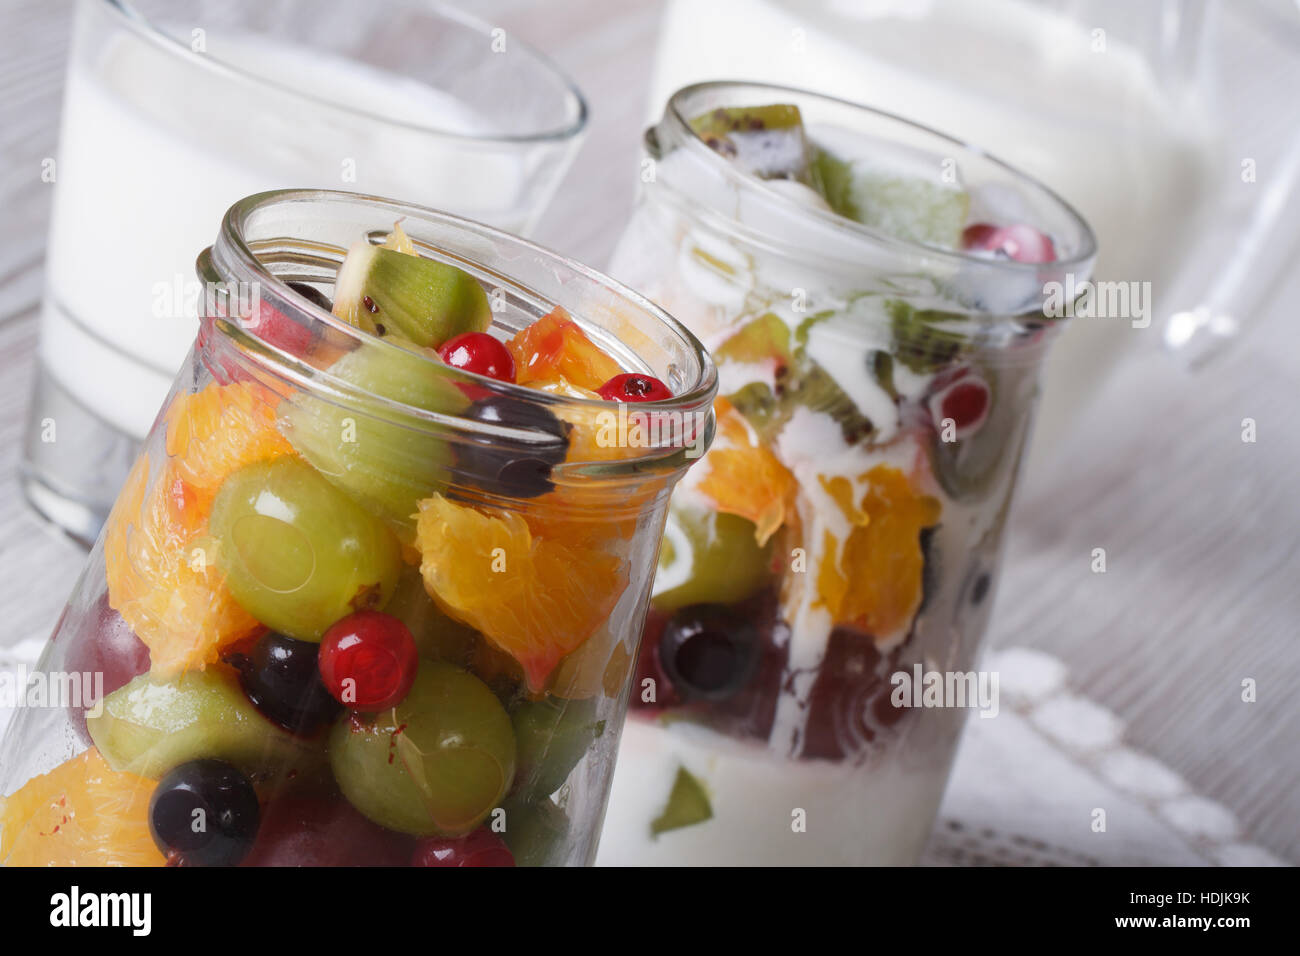 pieces of fresh fruit in a glass jar and yogurt on the table macro horizontal Stock Photo